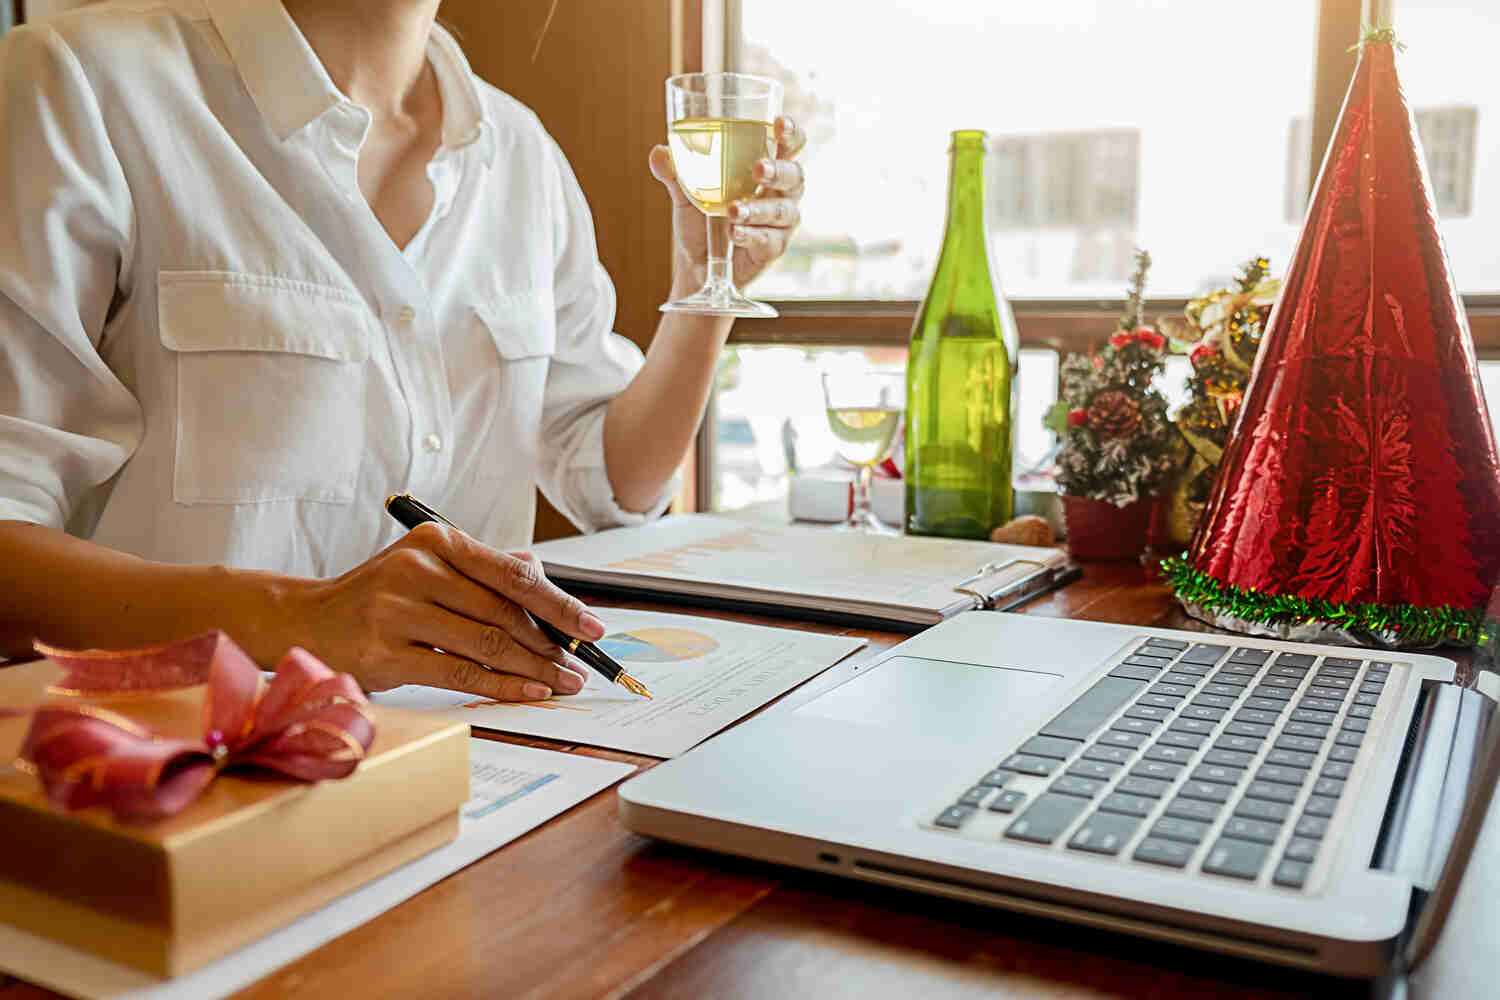 Winery businesswoman having wine while doing accounting works